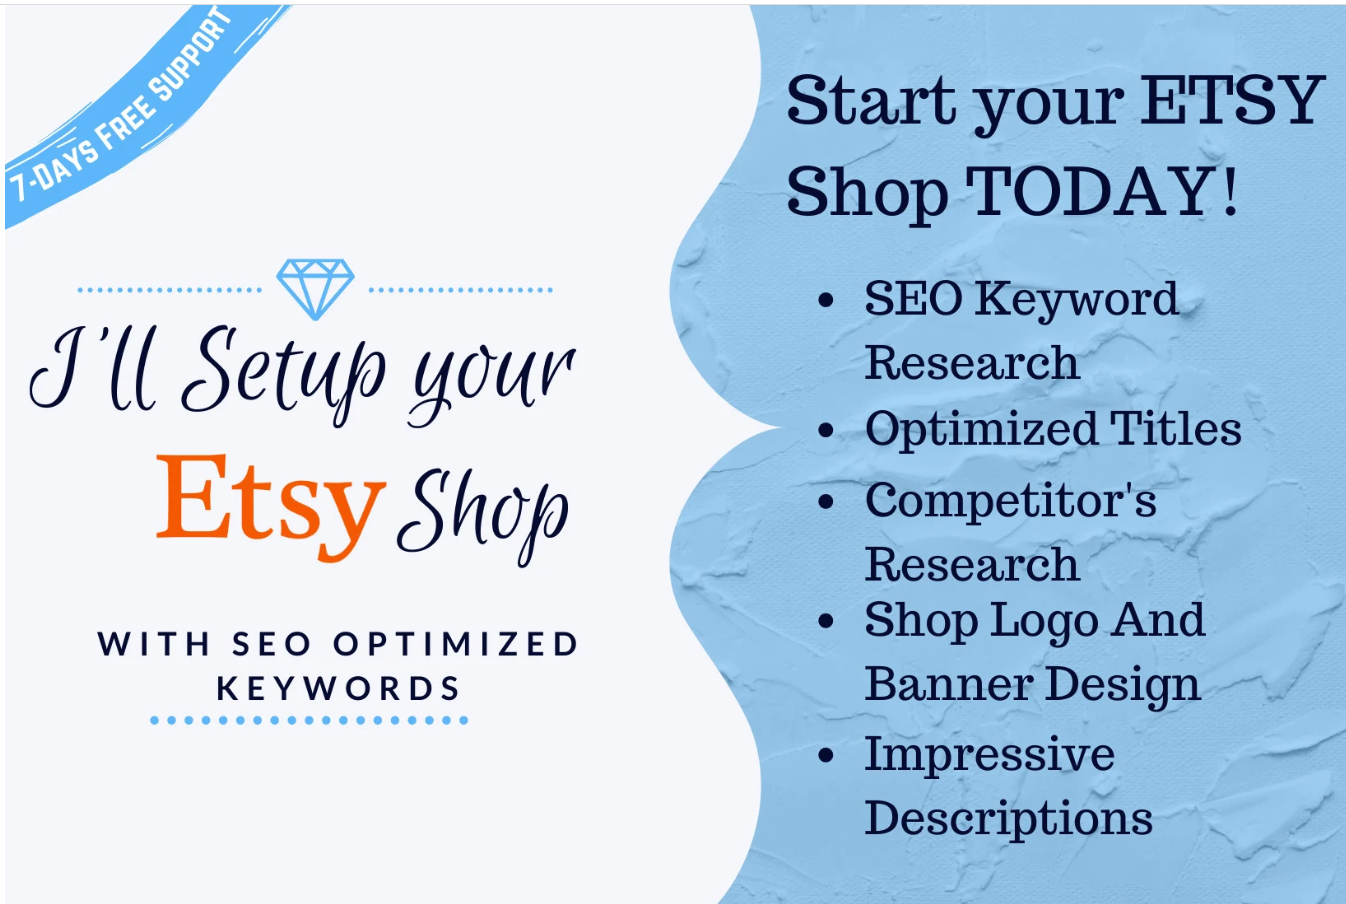 Complete Etsy SEO title and tags to top rank Etsy Listing.